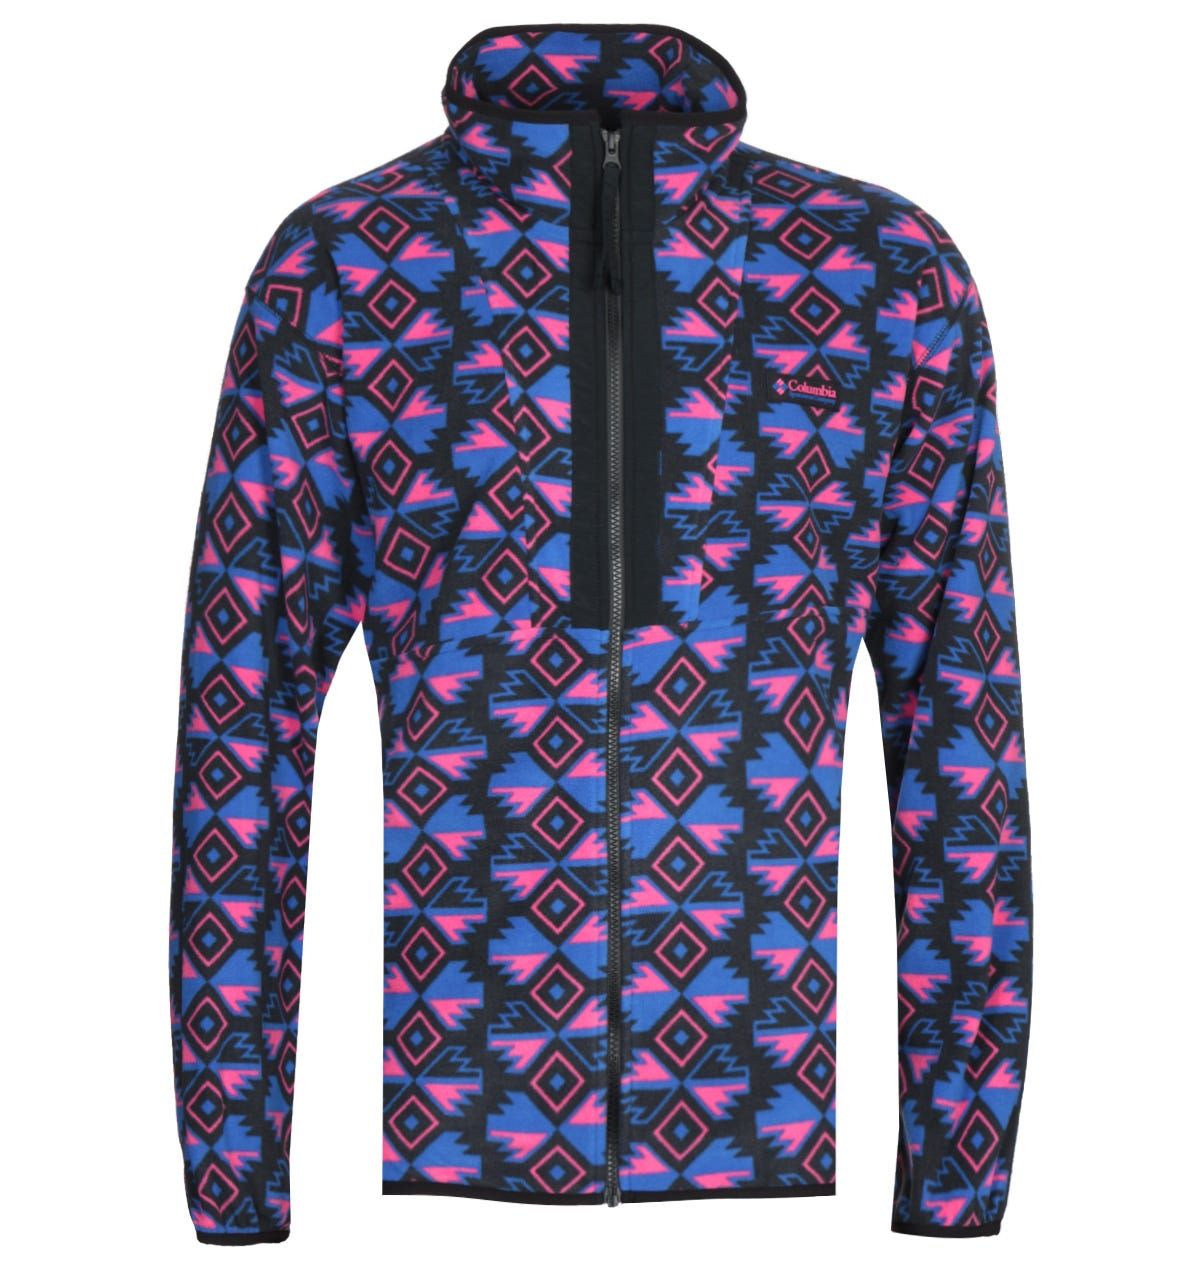 <p>A Columbia essential perfect for this seasons wardrobe. The Columbia Pink, Black & Blue Back Bowl Fleece is a lightweight polyester composition, fitted with a full zip fastening with side-entry pockets either side. The design is finished with a unique pattern throughout and the Columbia logo embroidered on the chest.</p><ul><li>Polyester composition</li><li>Zip fastening</li><li>Tonal stitching throughout</li><li>Diamond pattern</li><li>Columbia logo located on chest</li></ul><p>Style & Fit:</p><ul><li>Regular fit</li><li>Fits true to size</li></ul><p>Fabric Composition & Care:</p><ul><li>100% Polyester</li><li>Machine wash</li></ul>